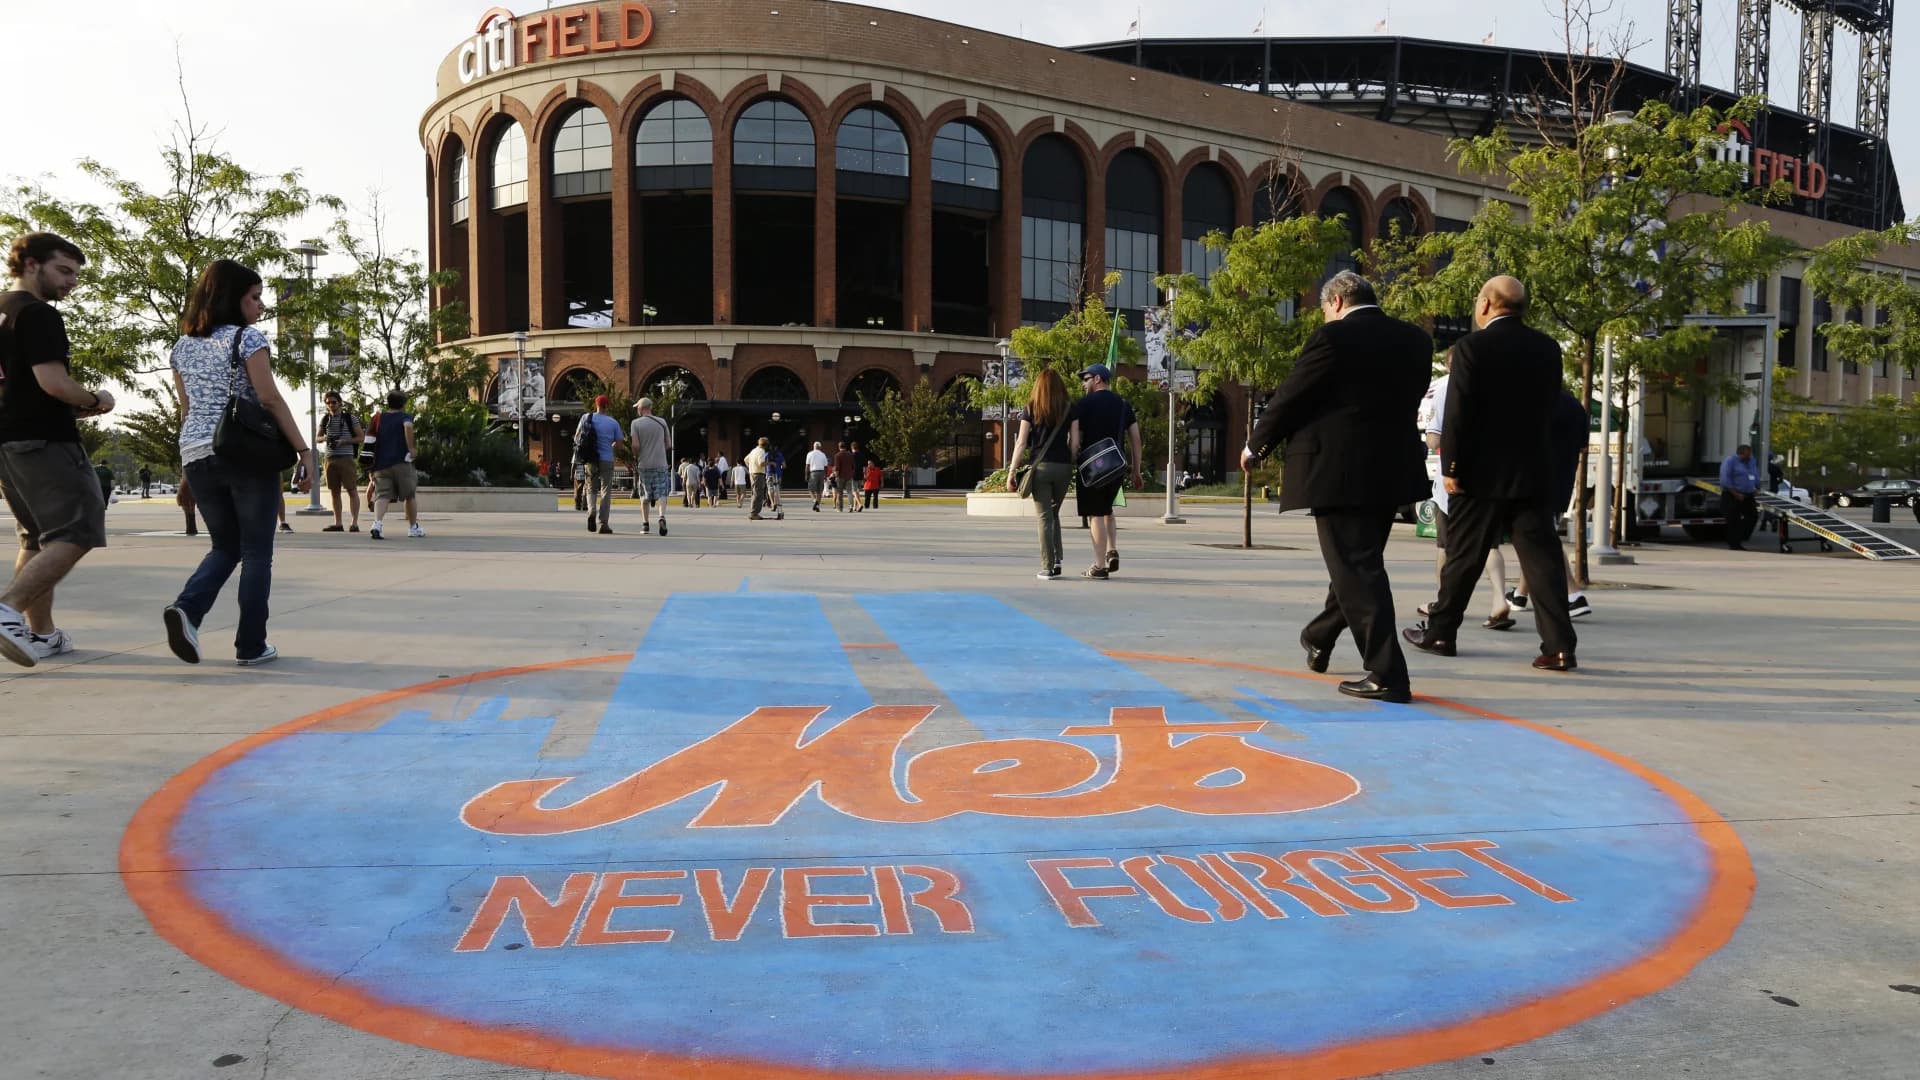 Mets to host 9/11 remembrance during game vs. Yankees on 20th anniversary